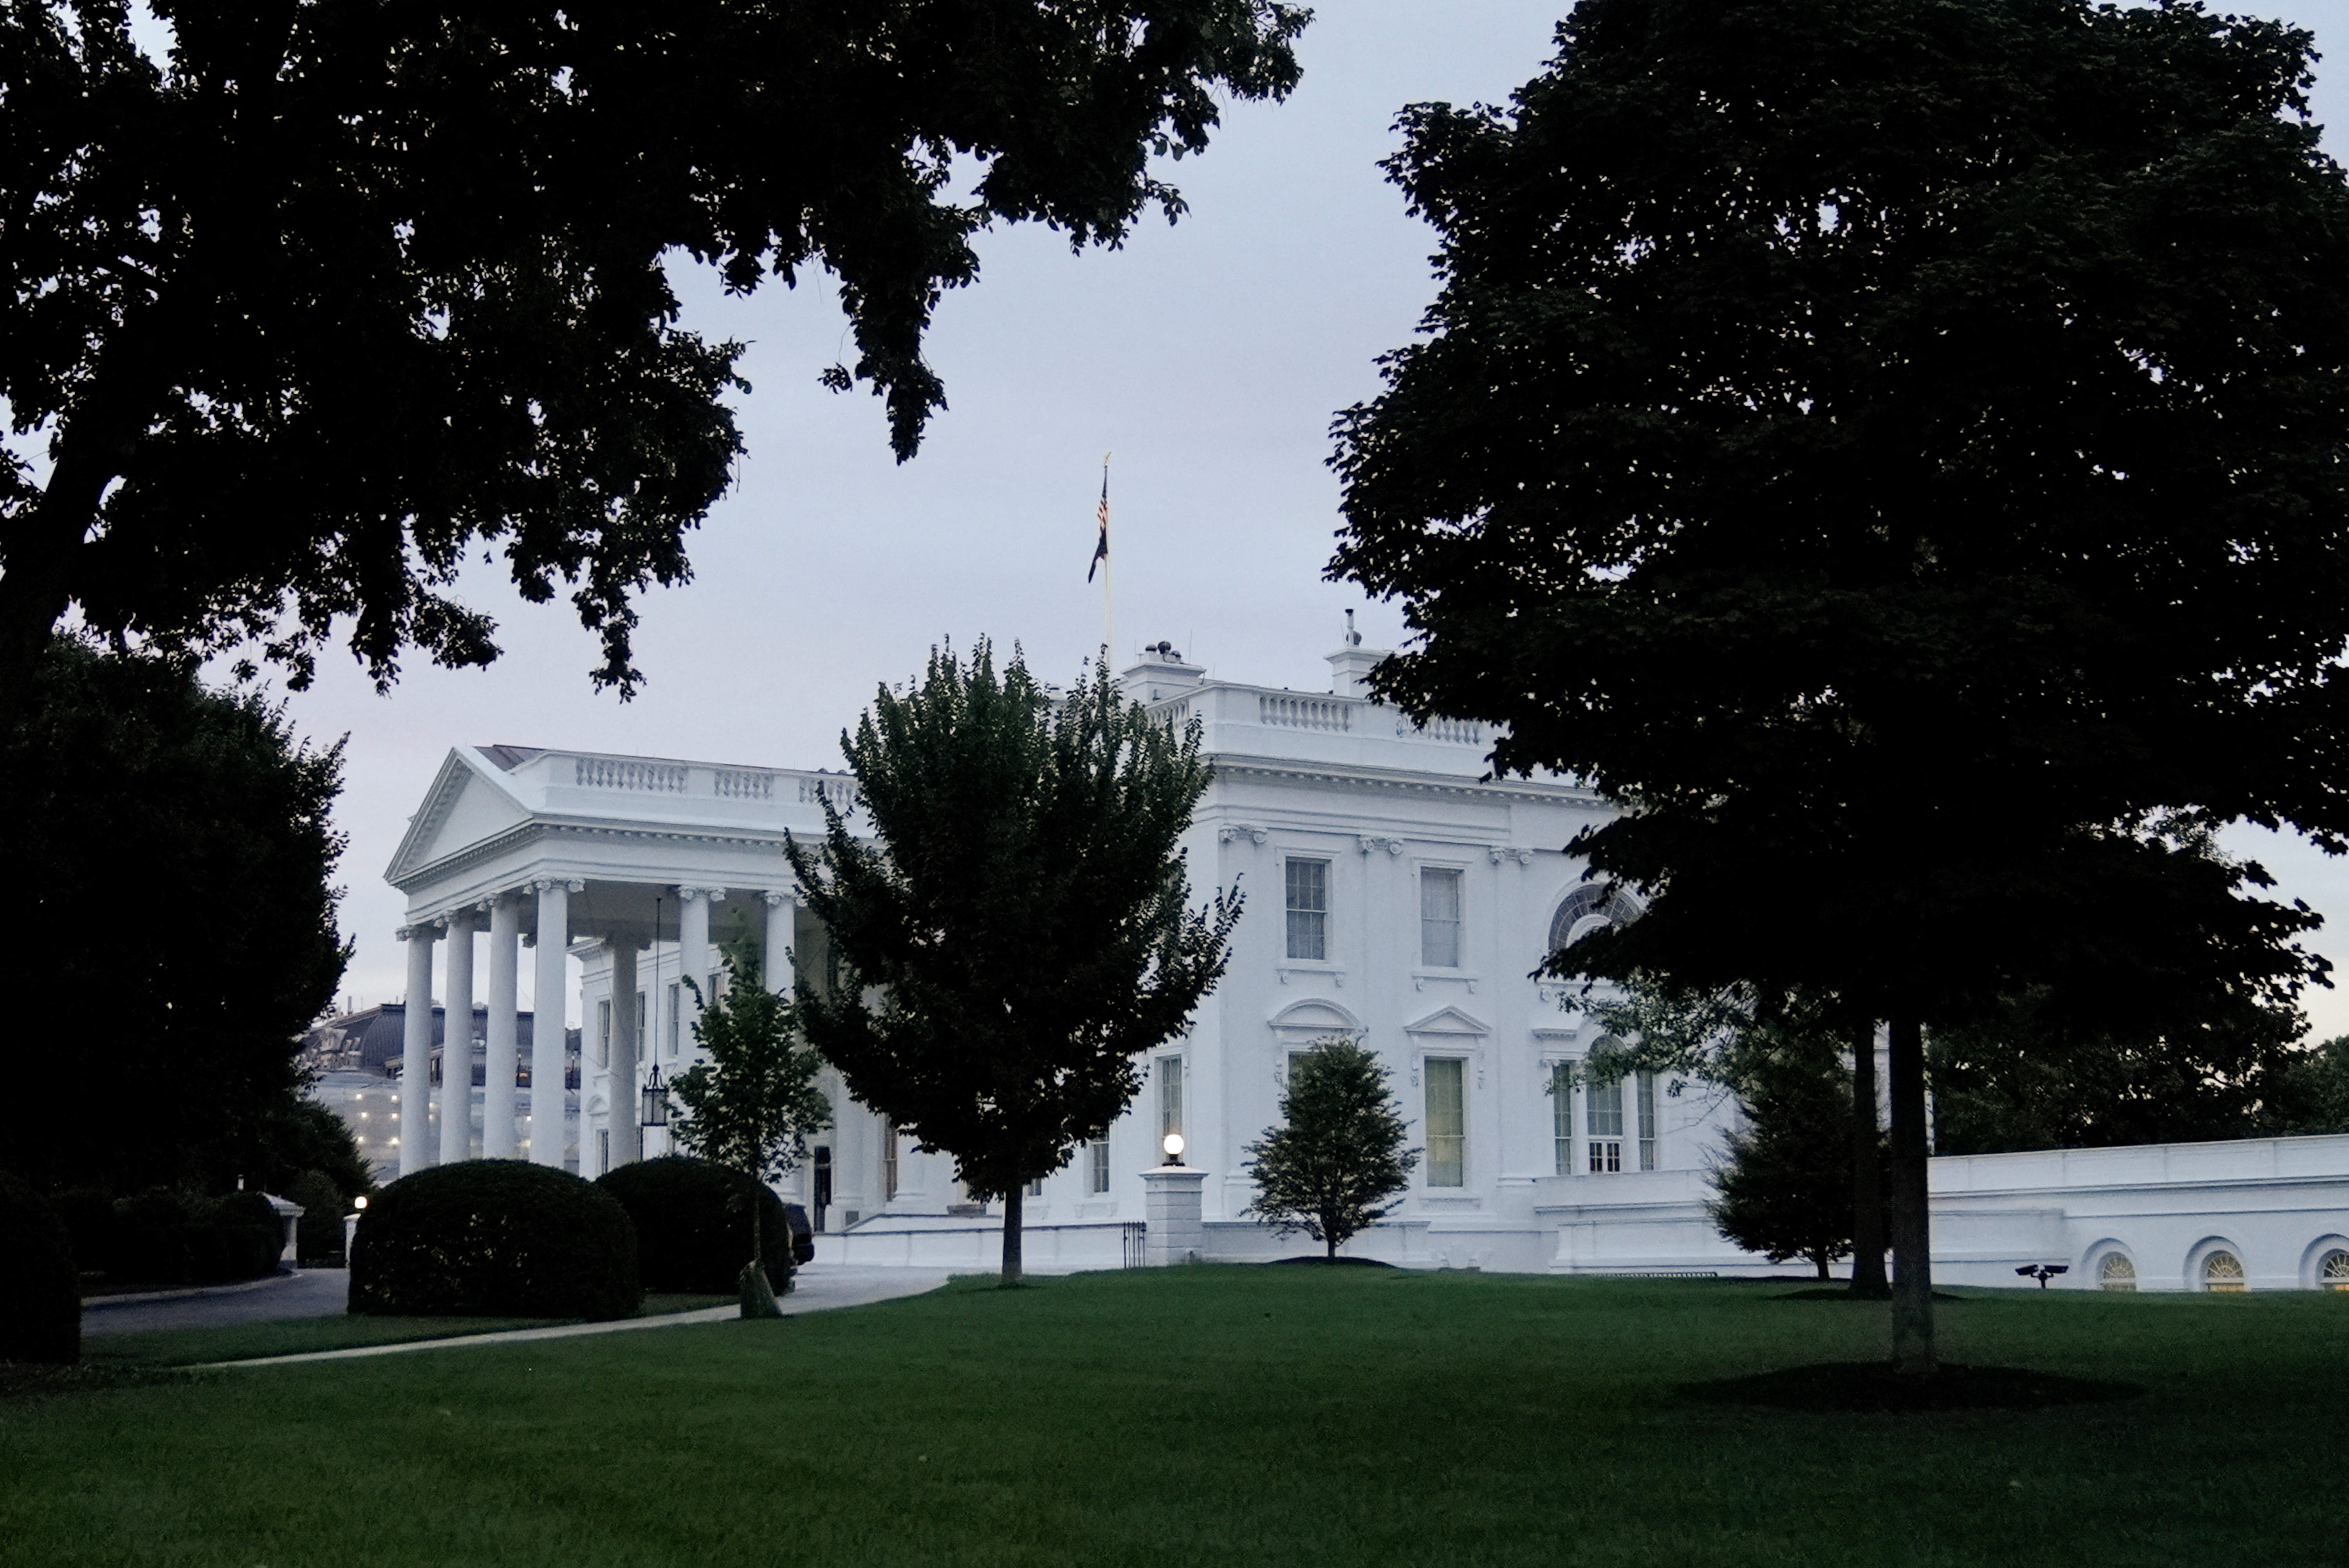 The White House is seen in Washington, D.C., U.S.